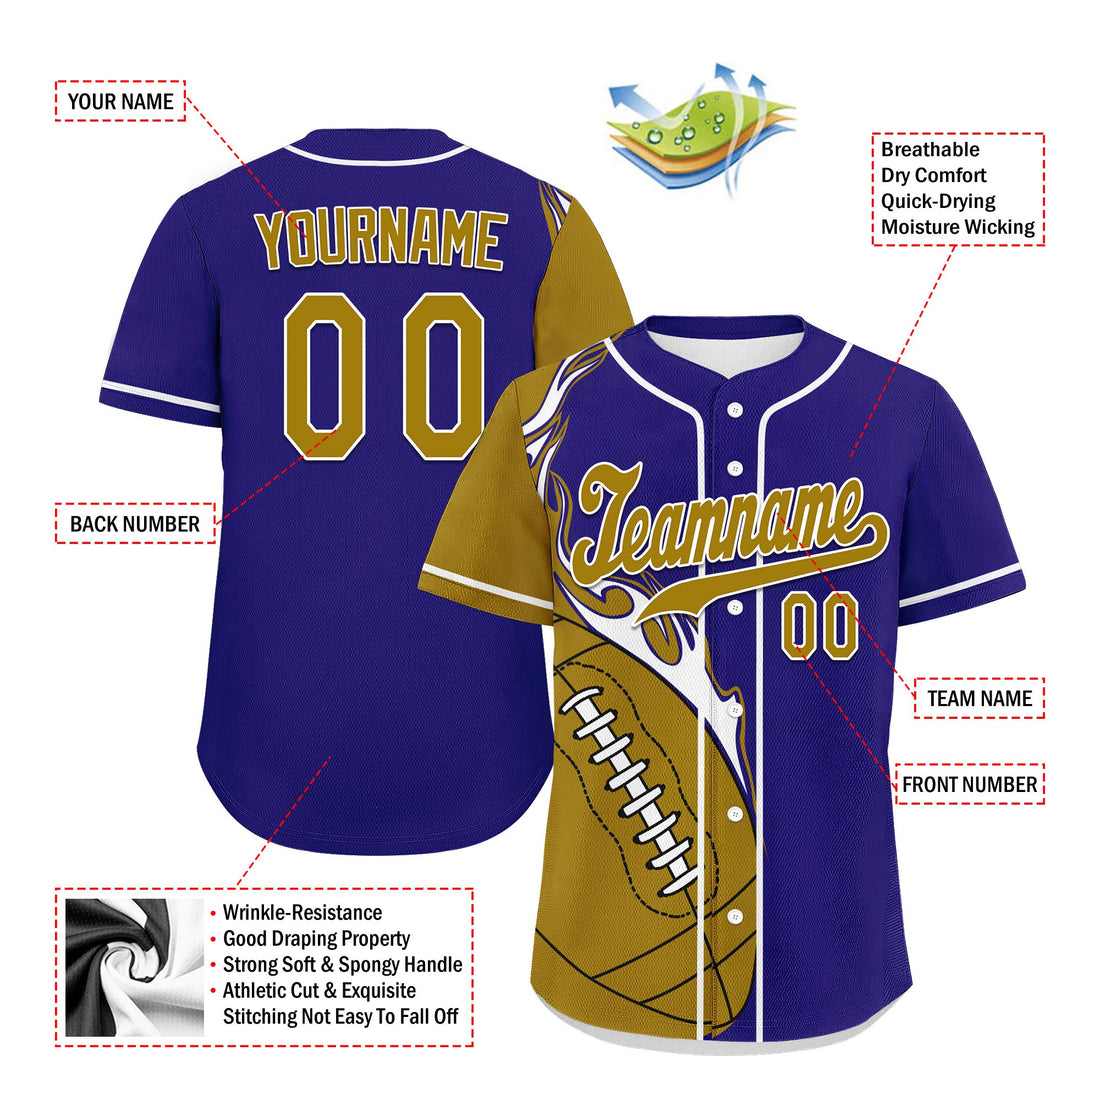 Custom Blue Yellow Classic Style Personalized Authentic Baseball Jersey UN002-D0b0a00-c